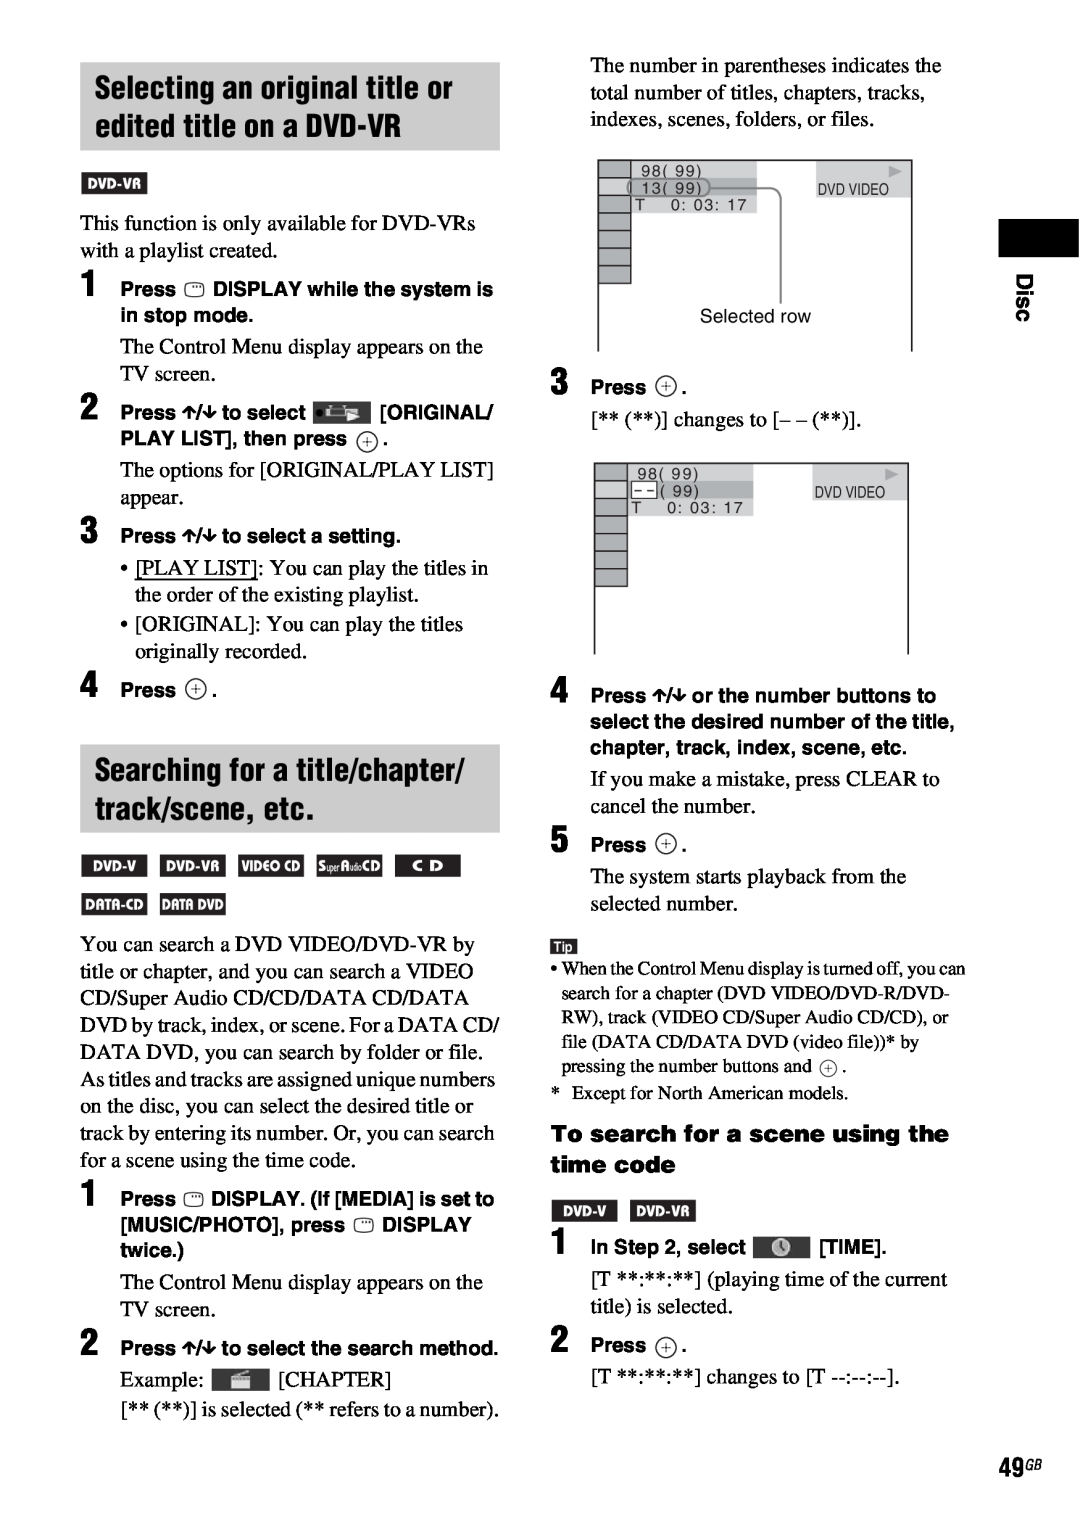 Sony DAV-HDX685 manual To search for a scene using the time code, Disc, Press DISPLAY while the system is in stop mode 